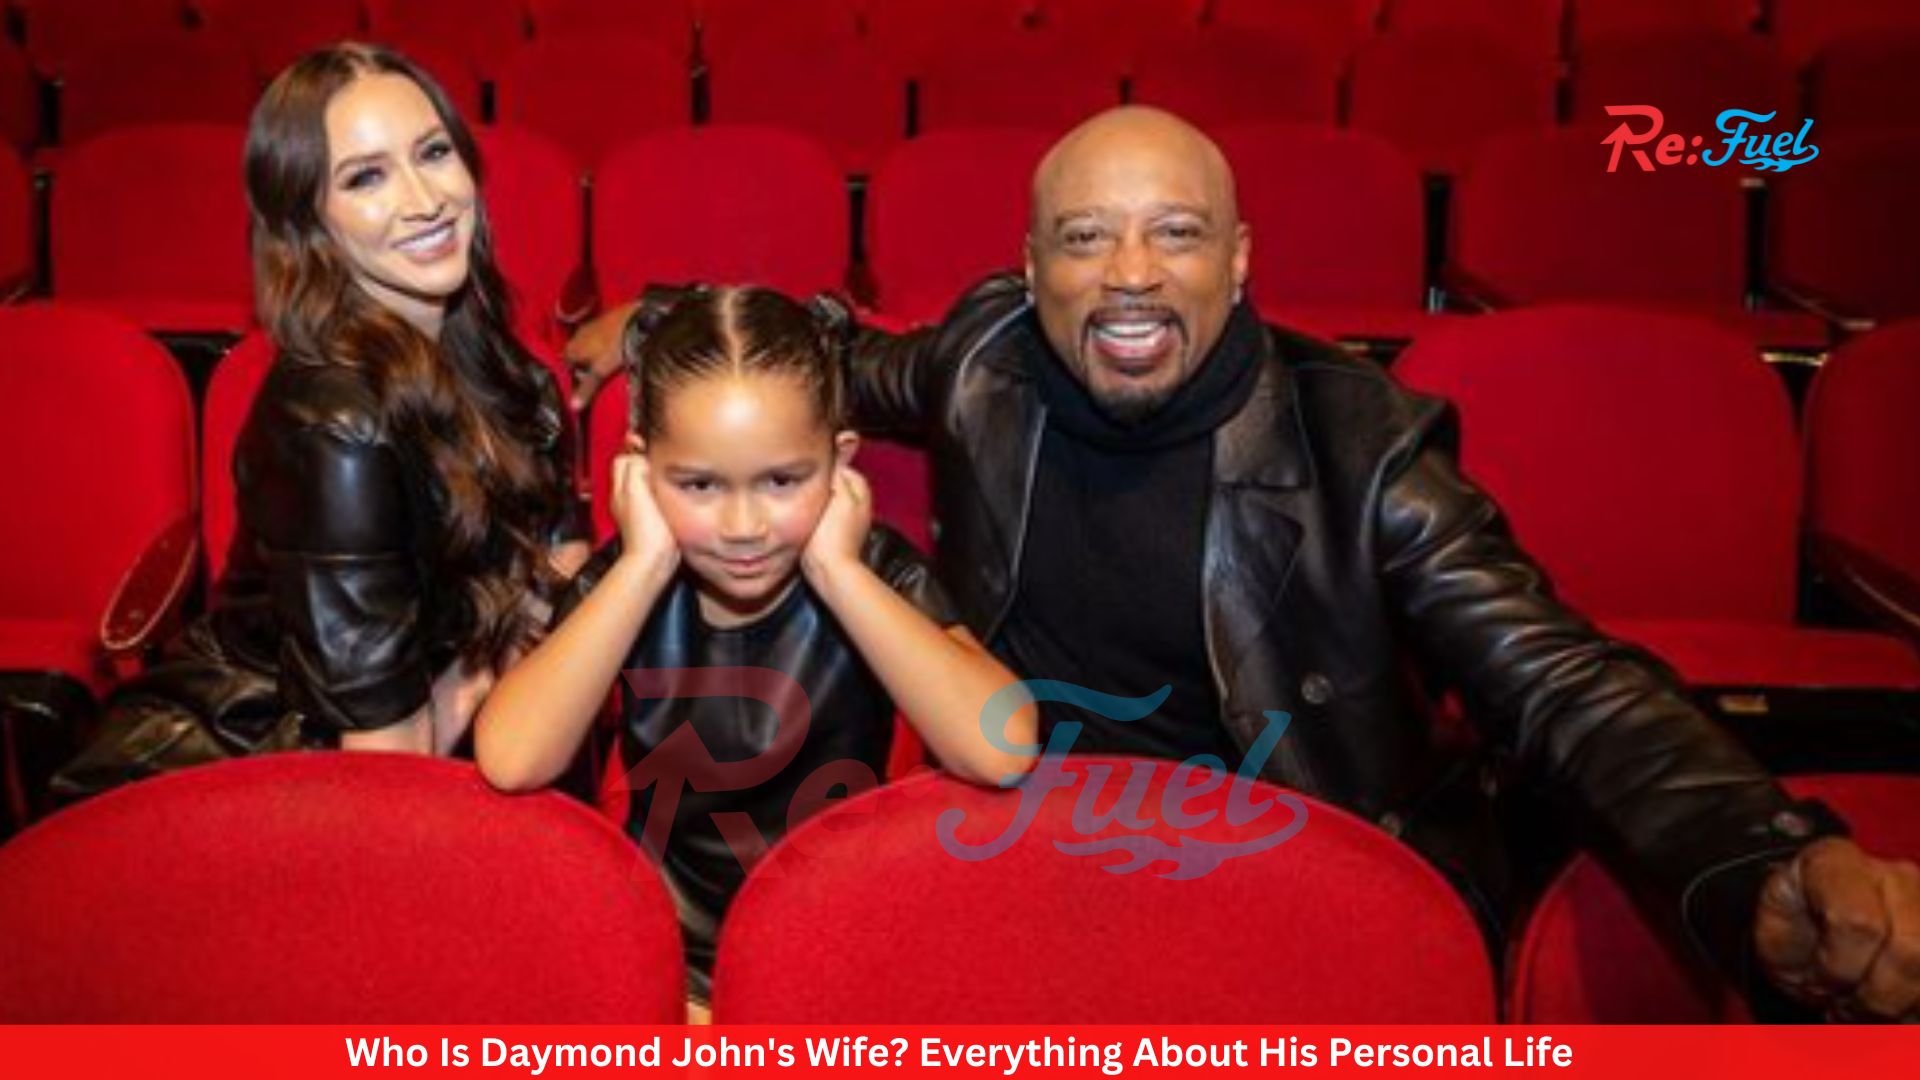 Who Is Daymond John's Wife? Everything About His Personal Life